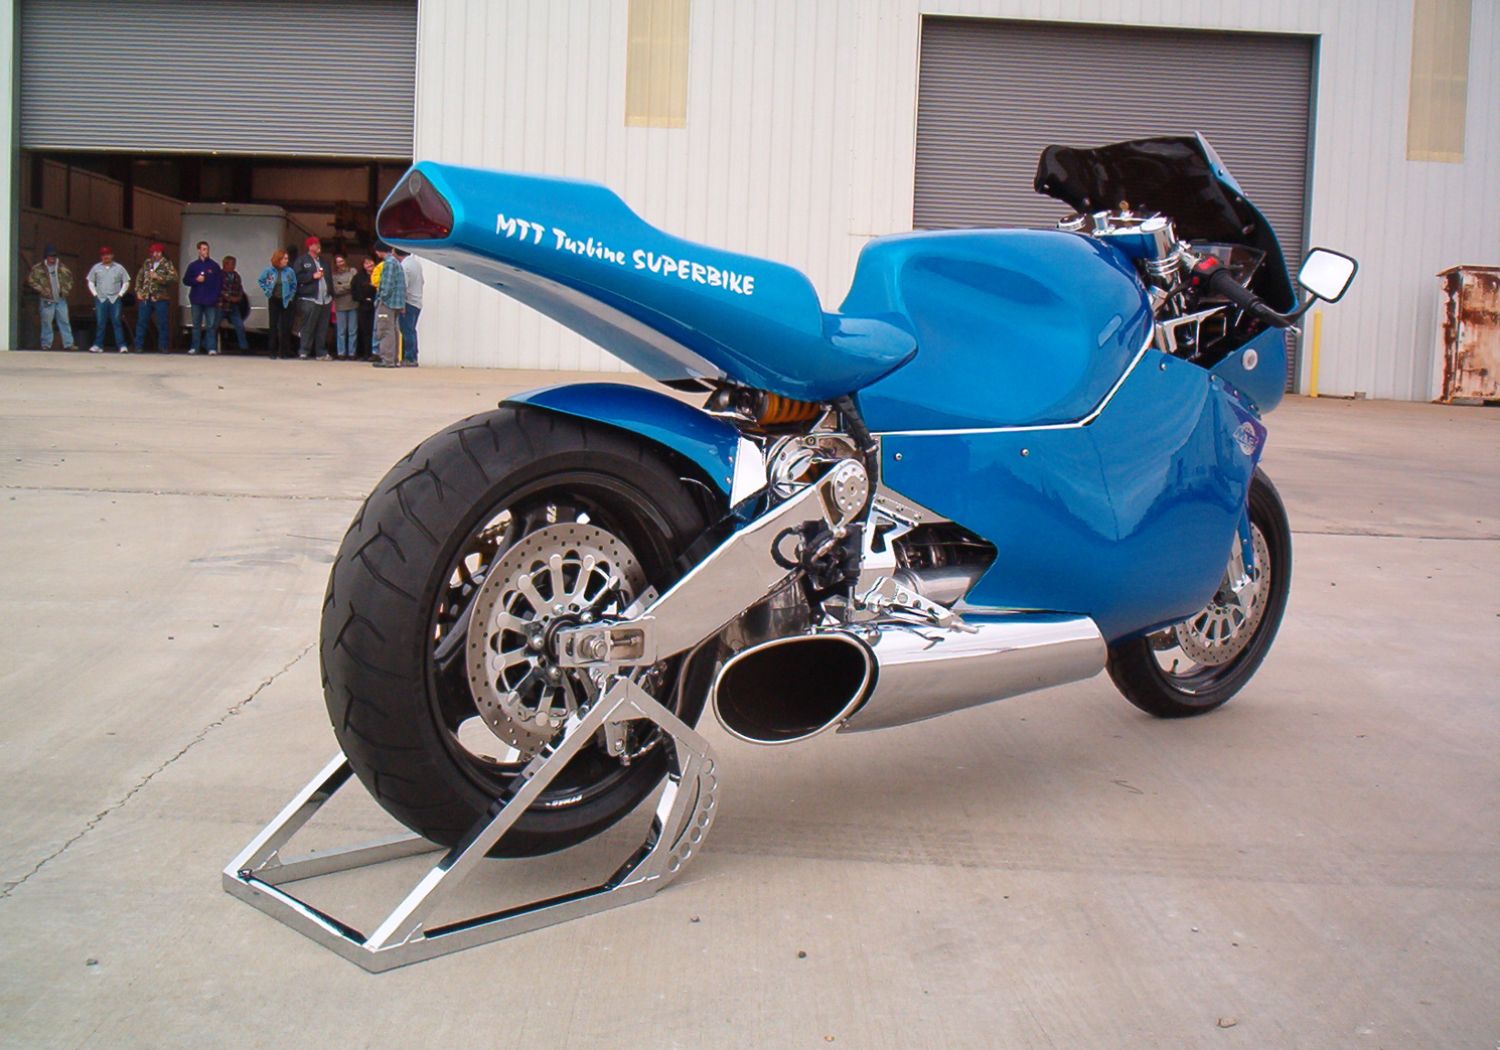 MTT Y2K: The Insane Motorcycle Powered by a Rolls-Royce Helicopter